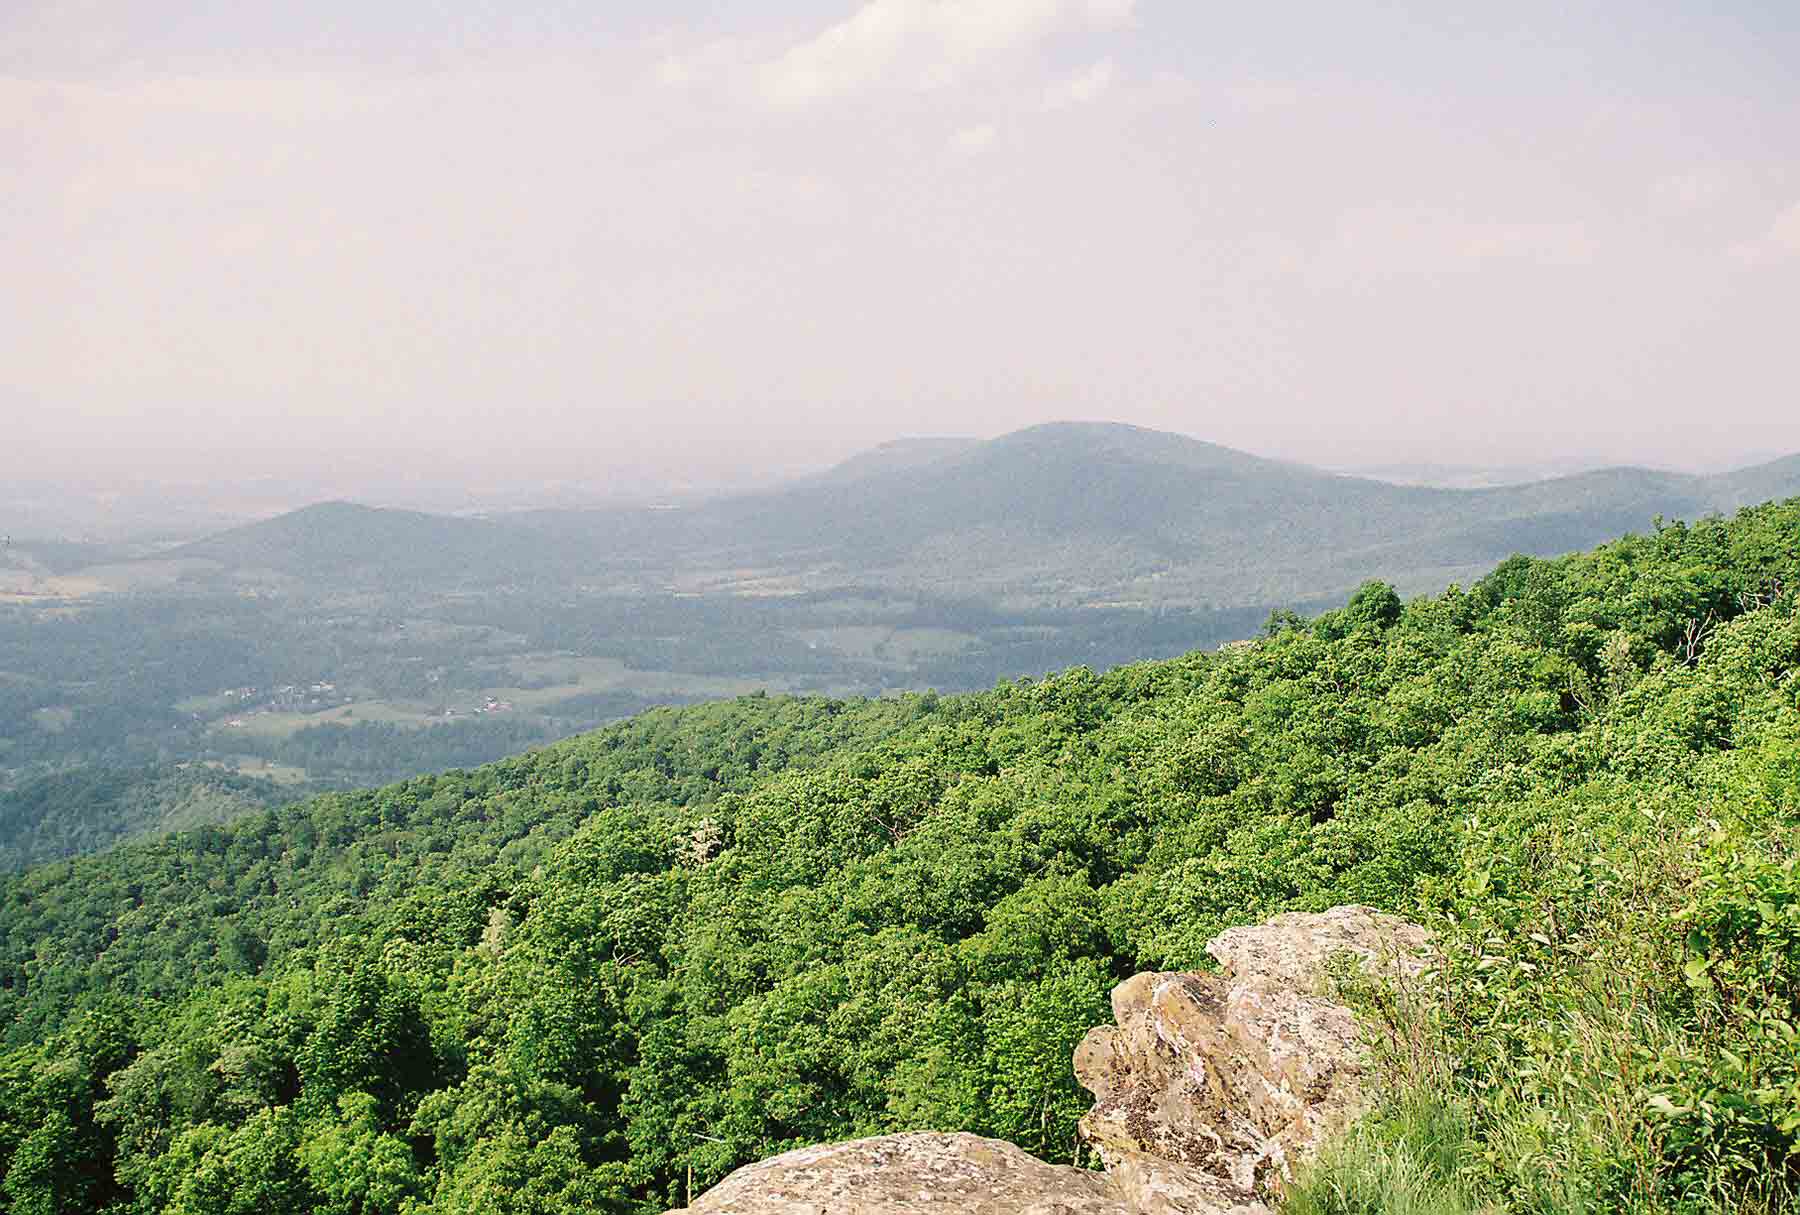 mm 12.0 - View west from viewpoint near summit of South Marshall Mt. (May 2004).  Courtesy dlcul@conncoll.edu